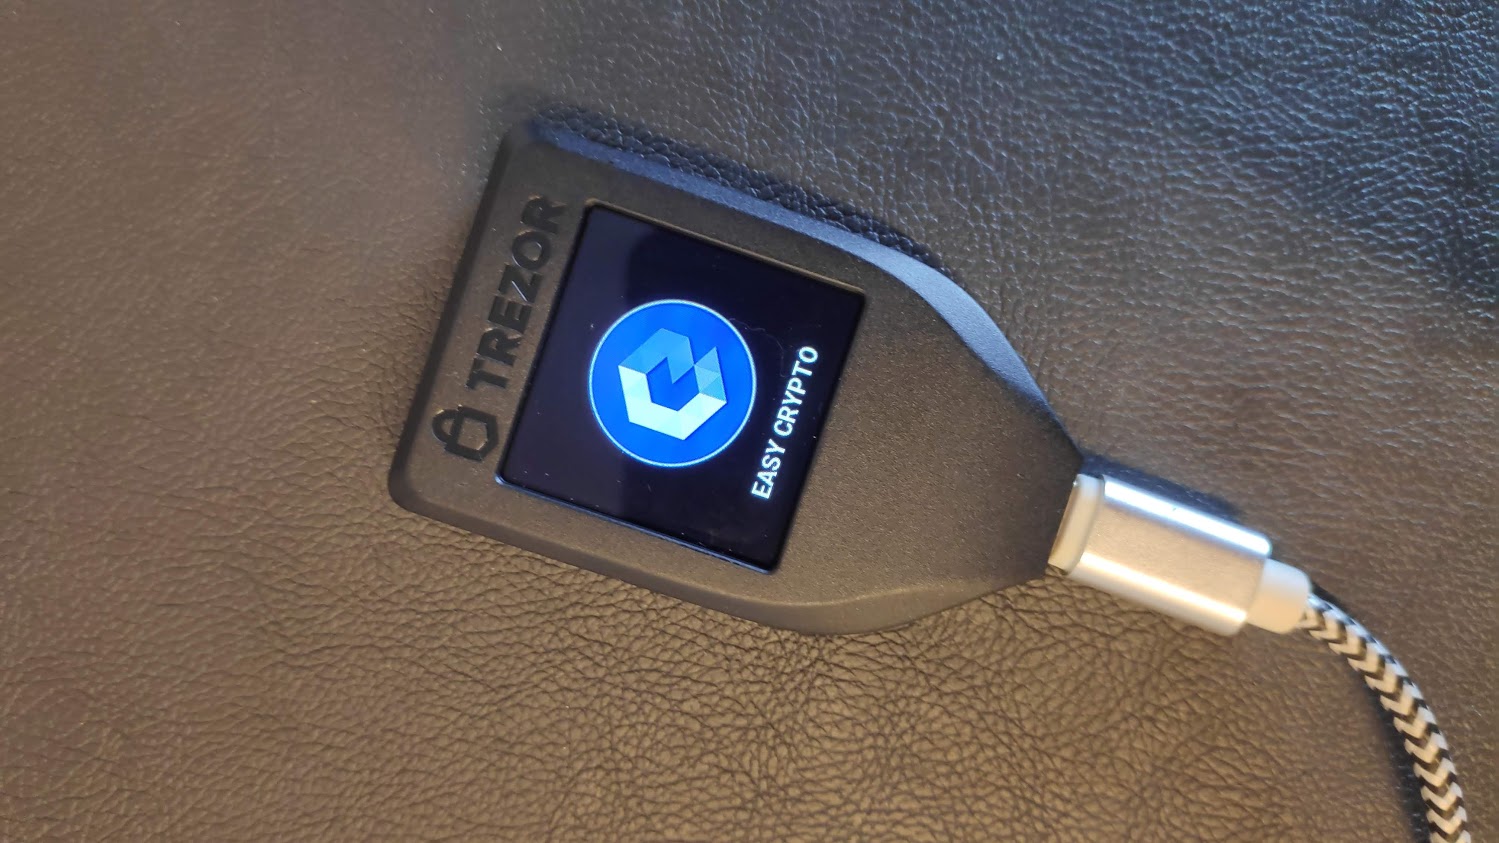 Trezor is the best wallet for most Kiwis